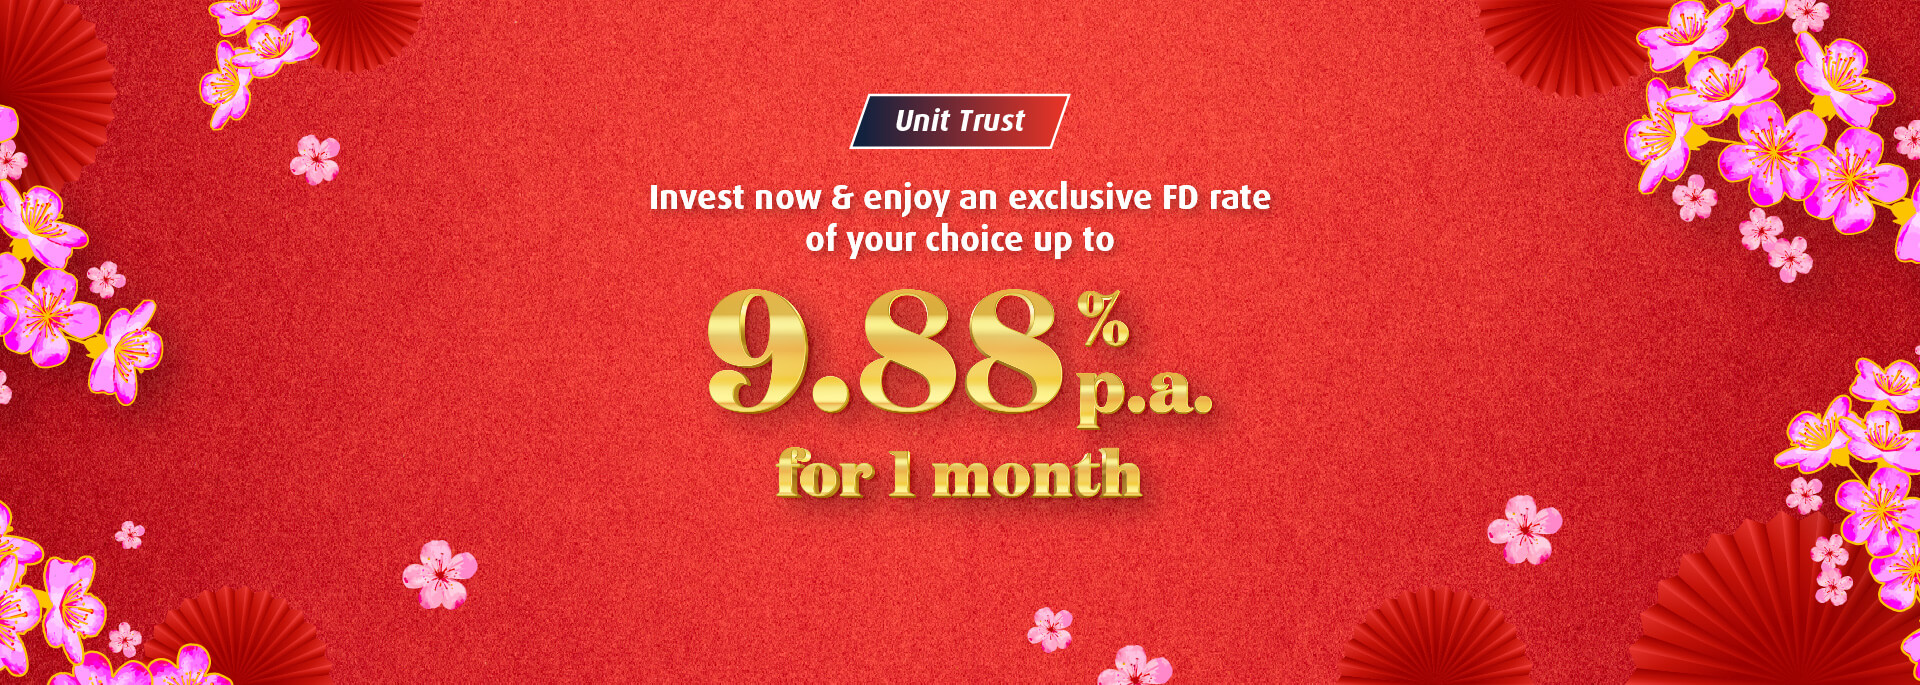 Invest now & enjoy an exclusive FD rate of your choice up to 9.88% p.a. for 1 month